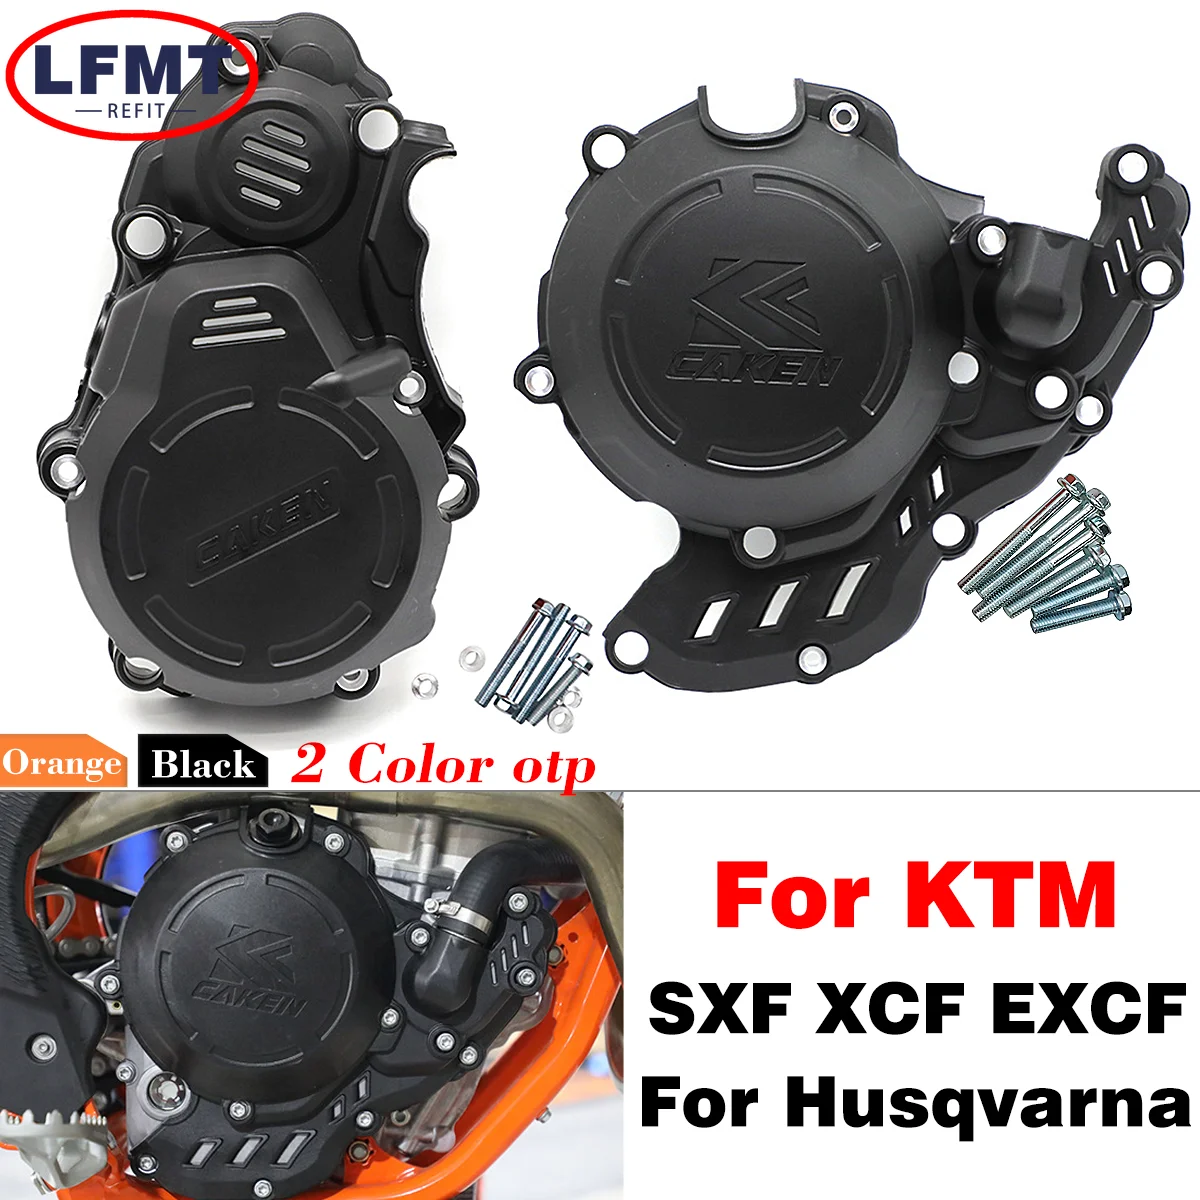 

Clutch Cover Guard Ignition Protector For KTM EXC-F SX-F XC-F XCF-W FREERIDE 4T For Husqvarna FC FE FX GAS GAS EC 250 350 2023